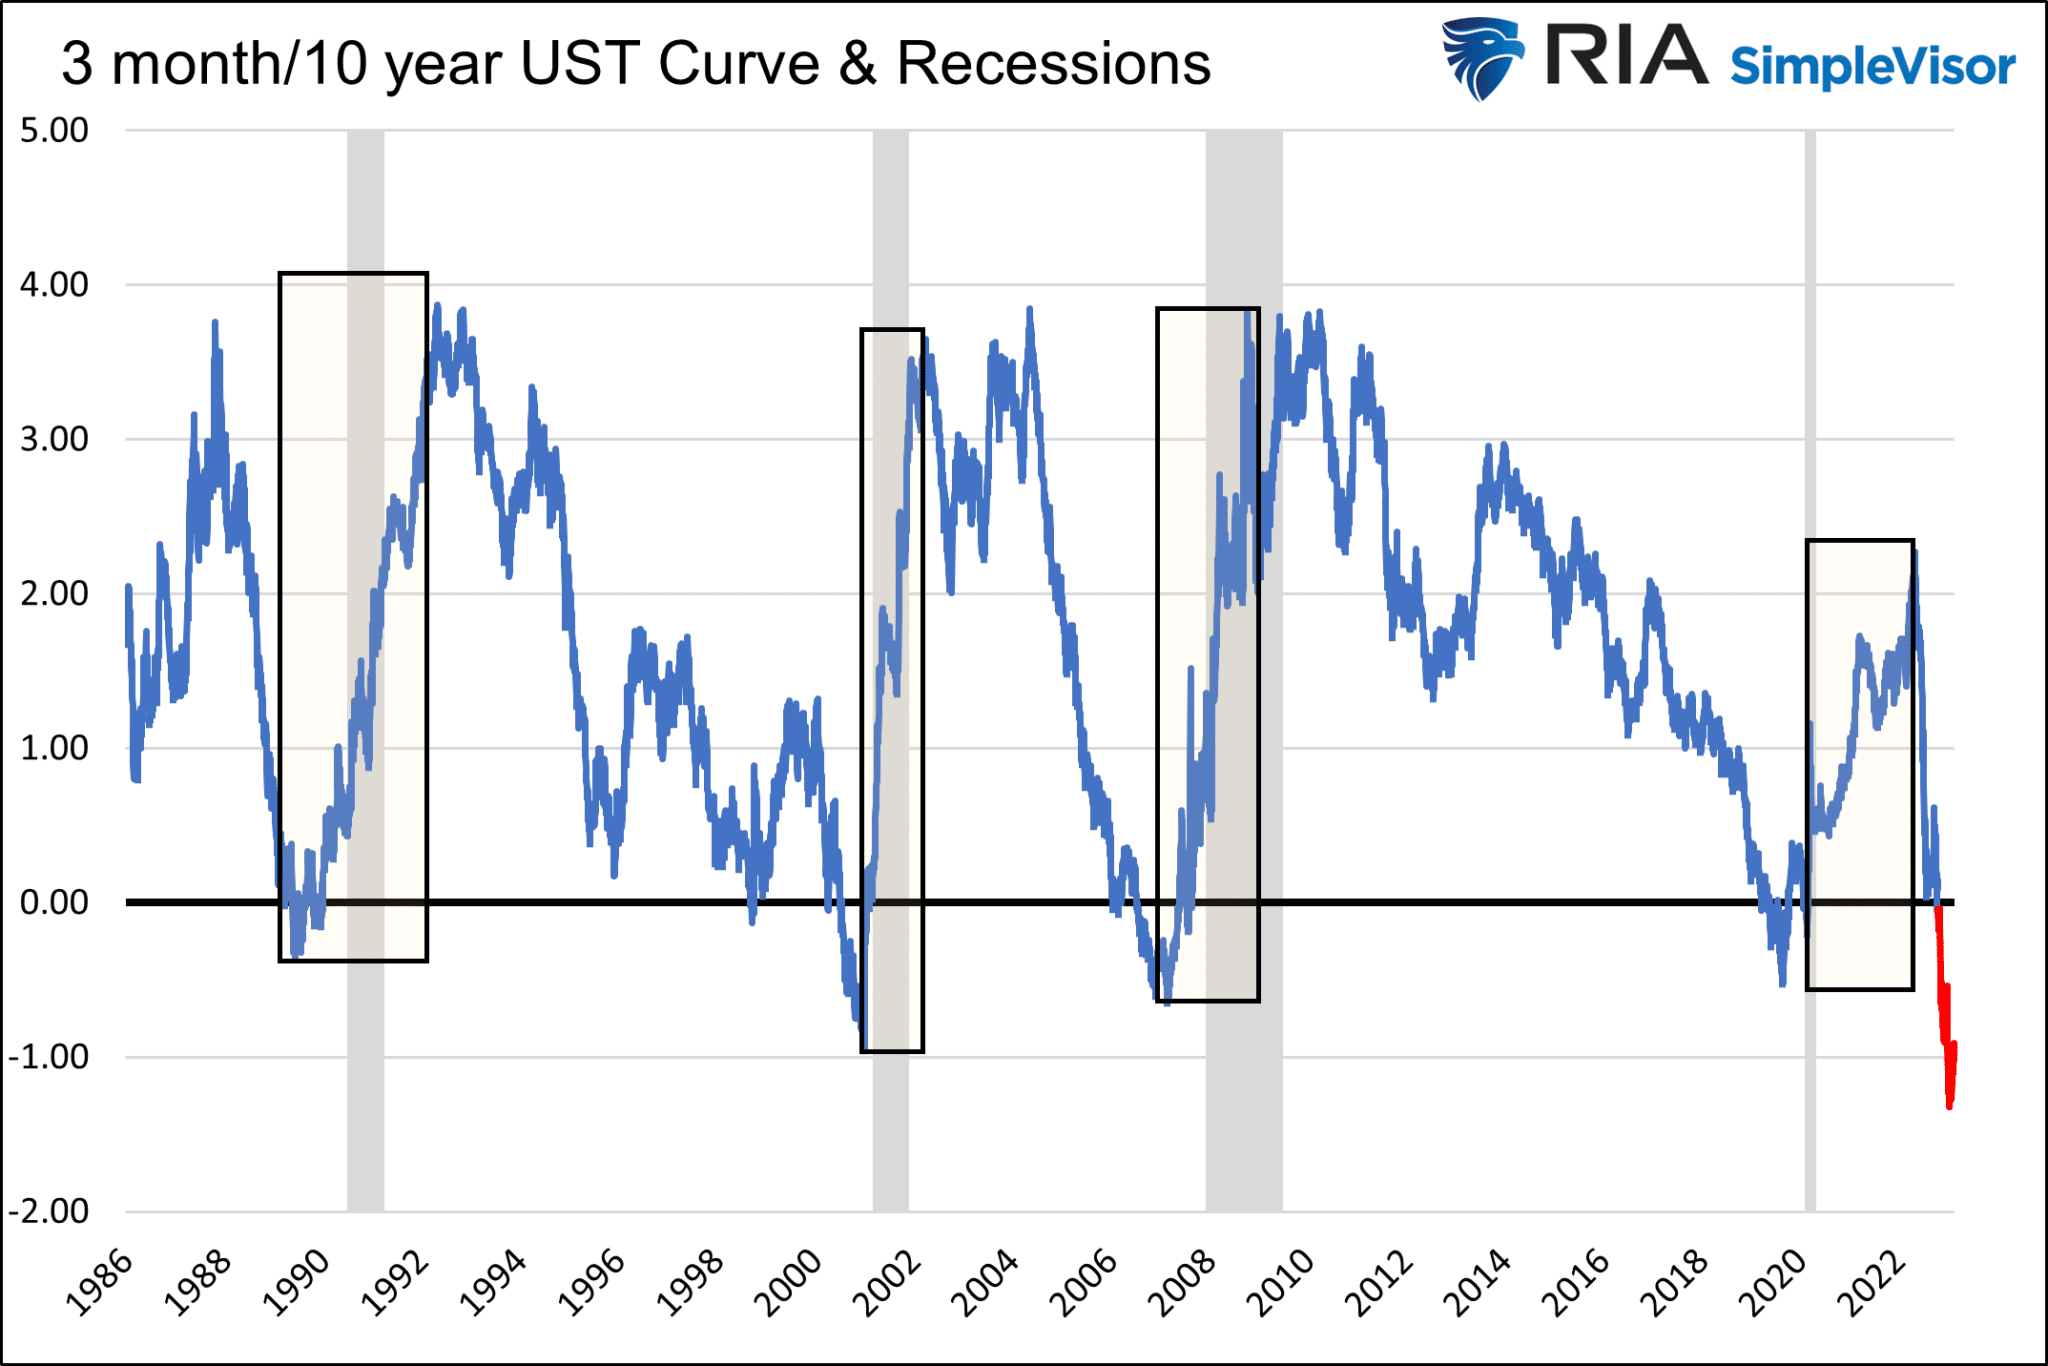 Yield Curve and Recessions